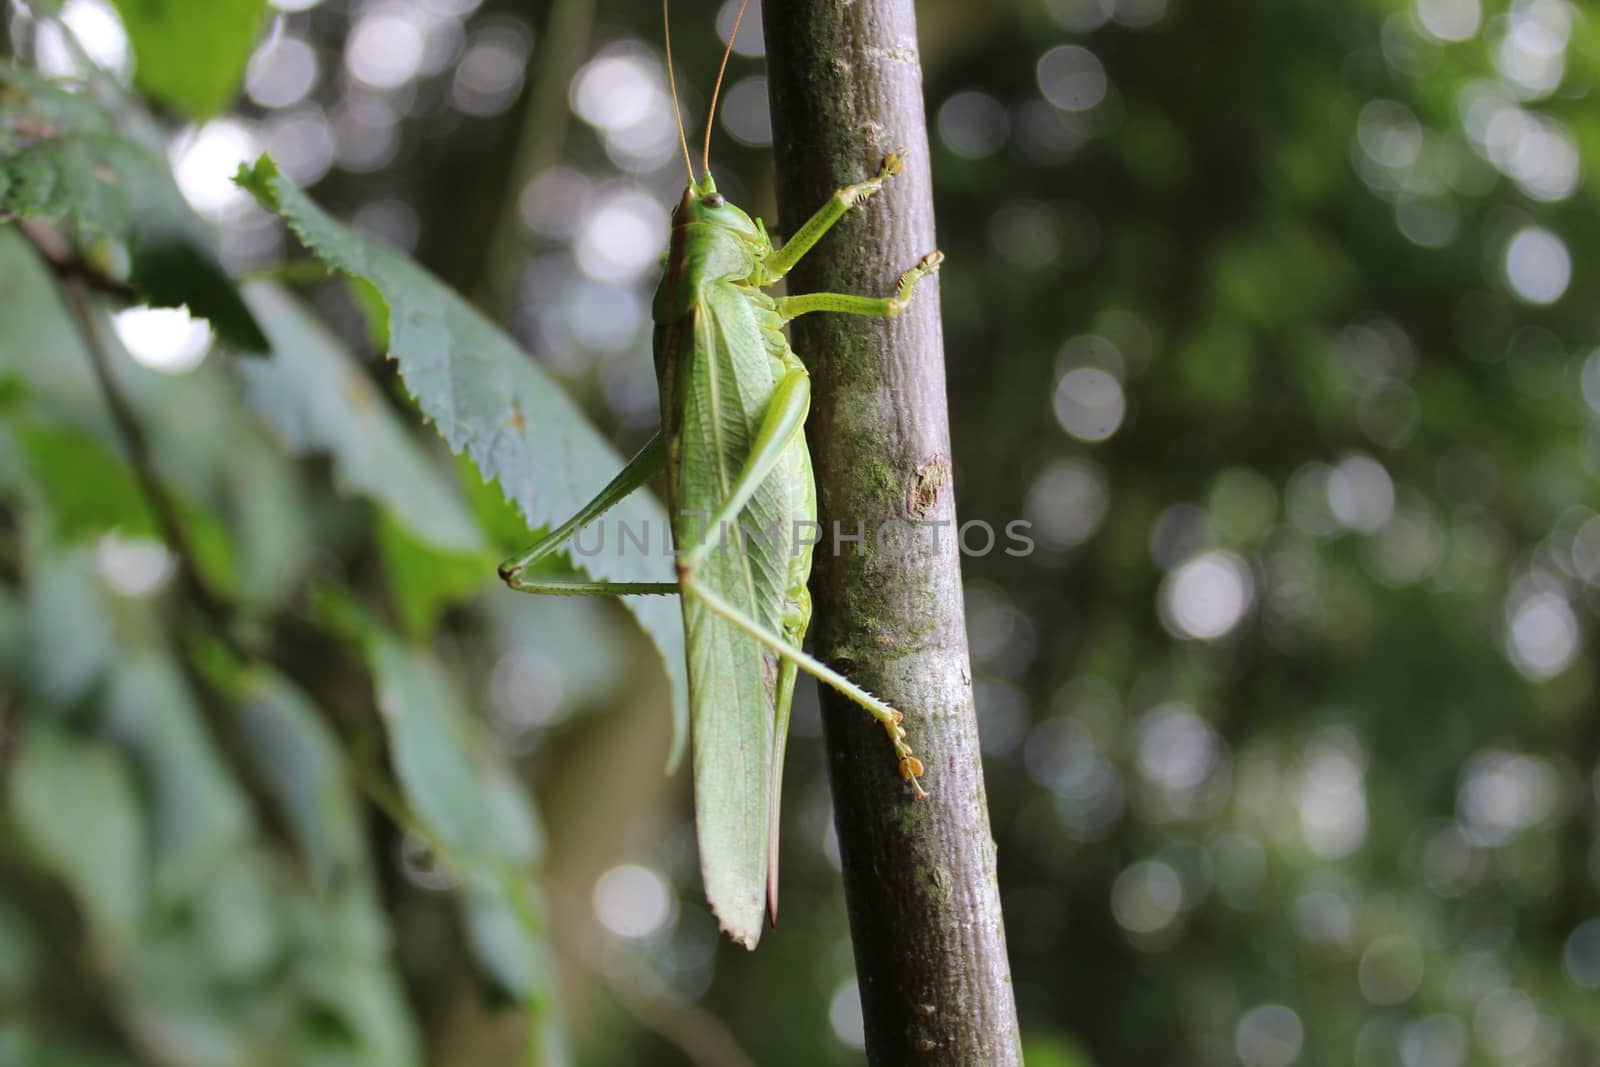 The picture shows a grasshopper in the nature.